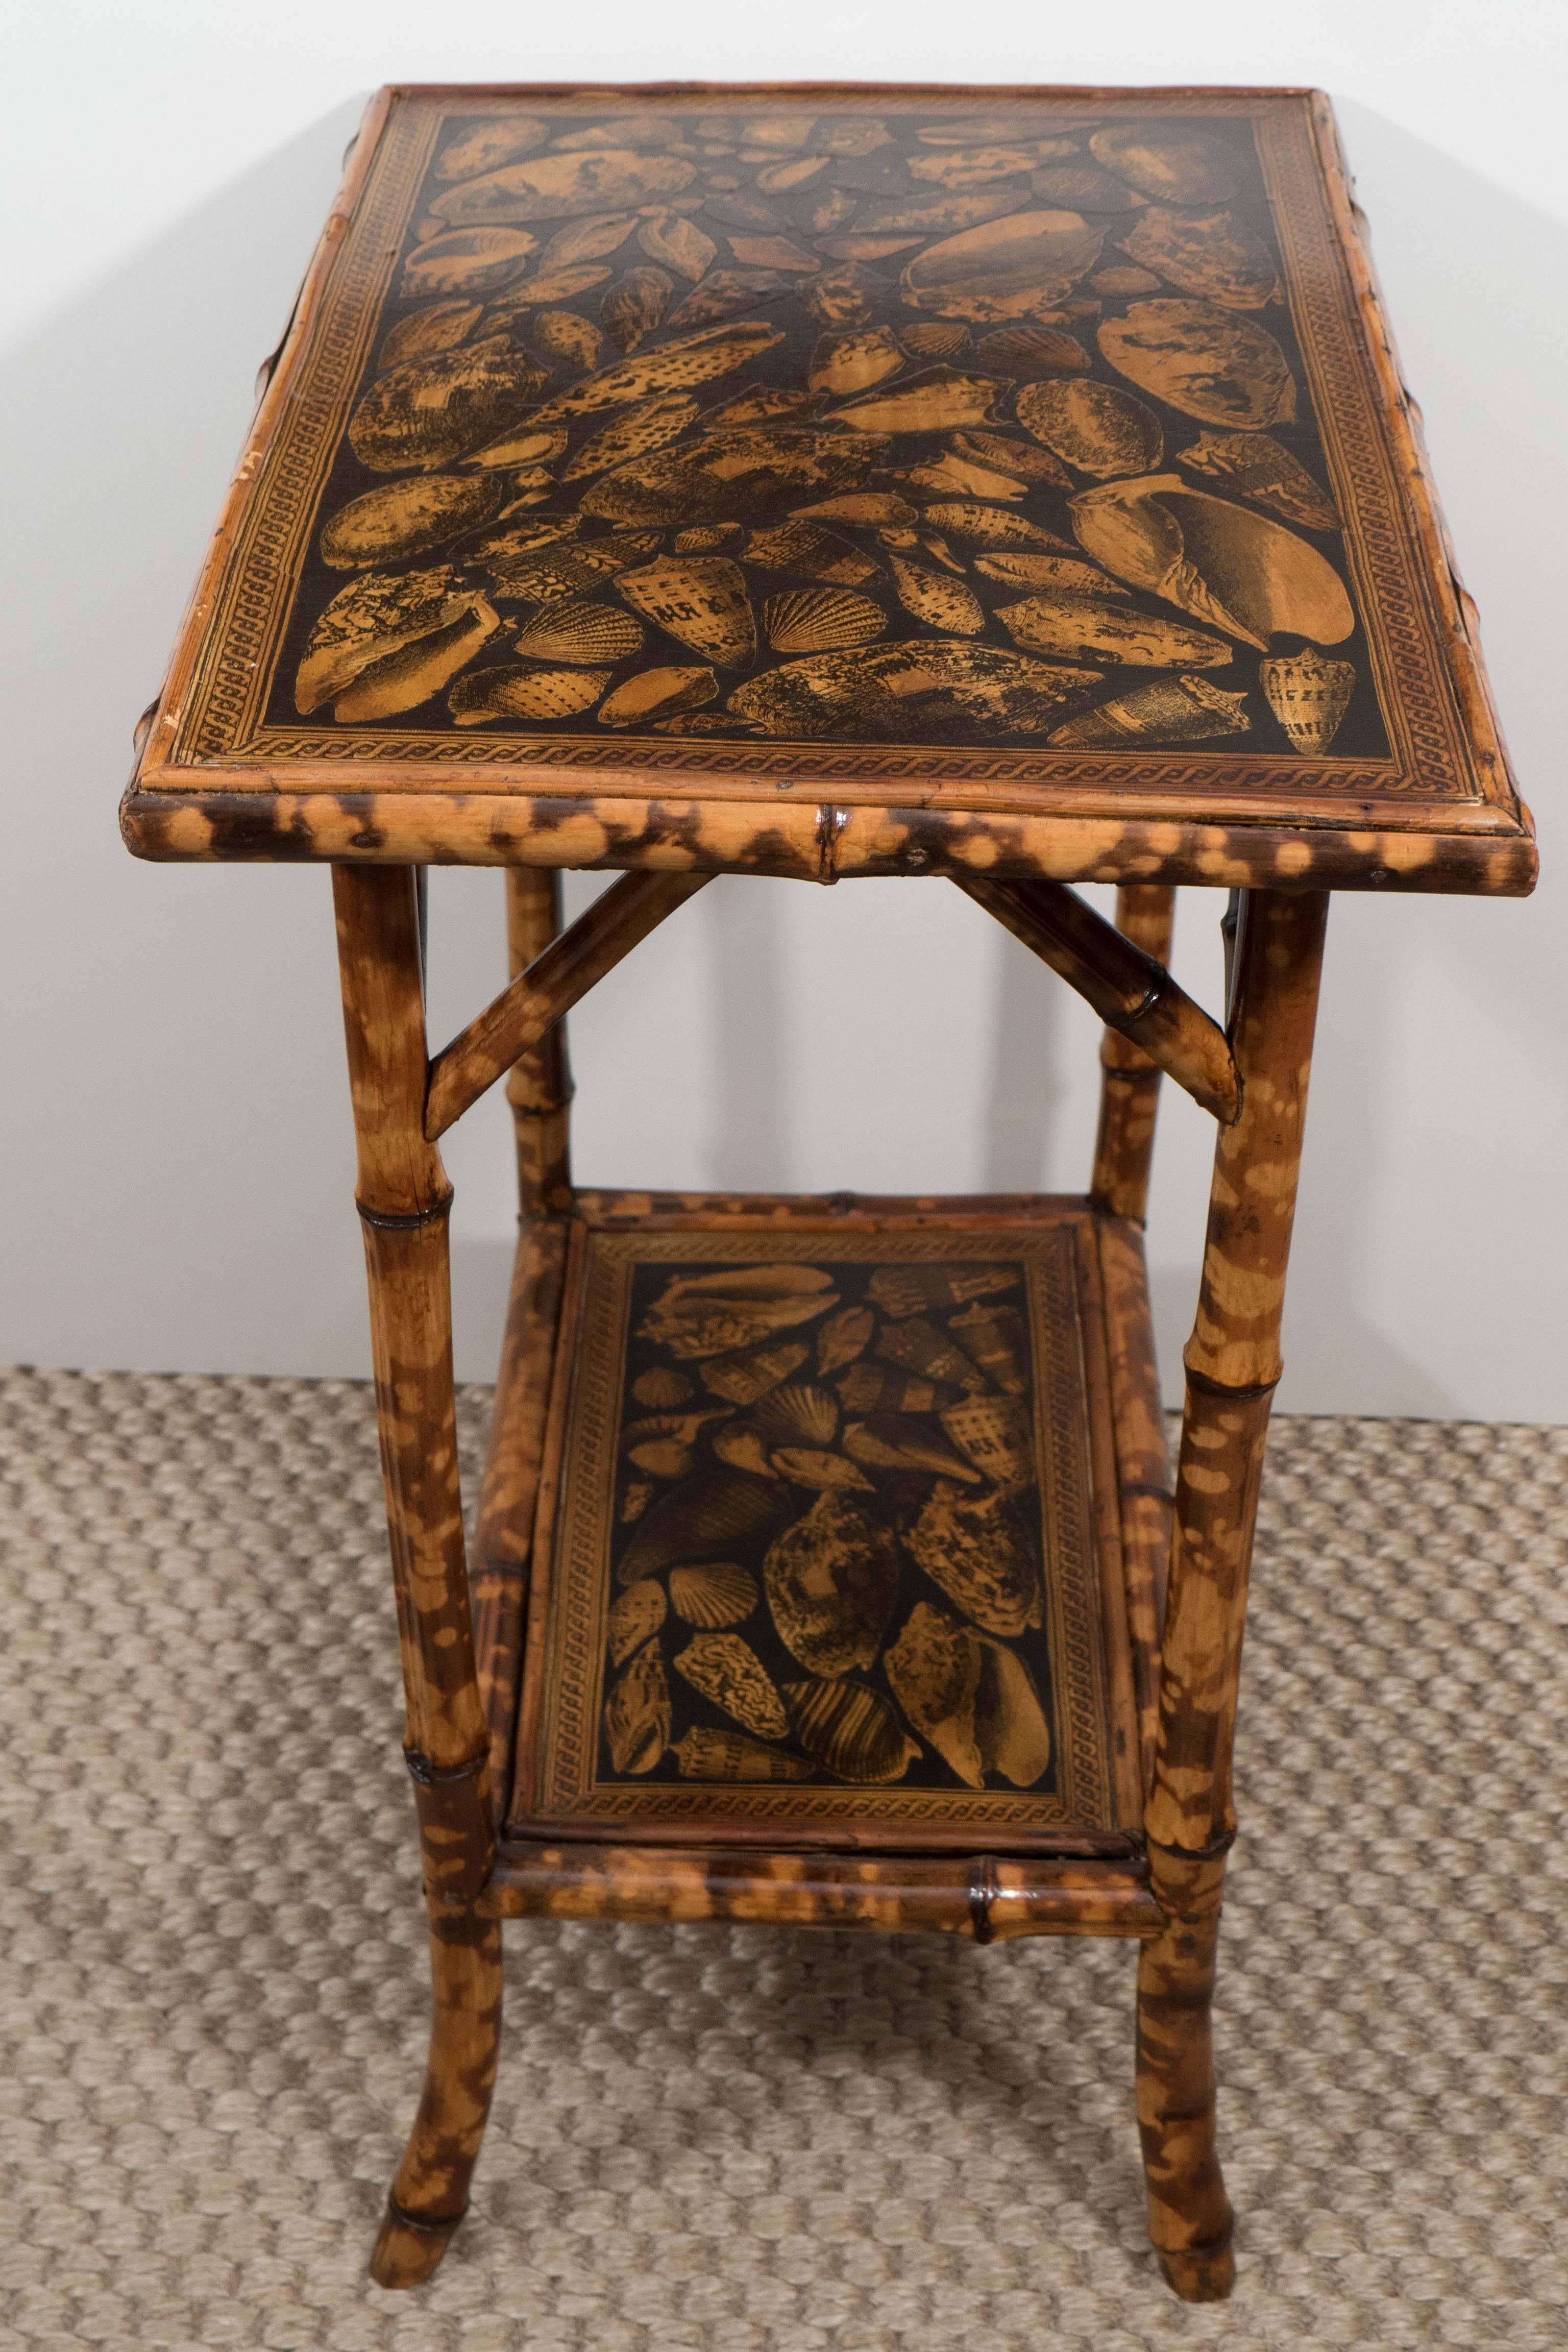 Small Bamboo Table with Decoupage Shells 1